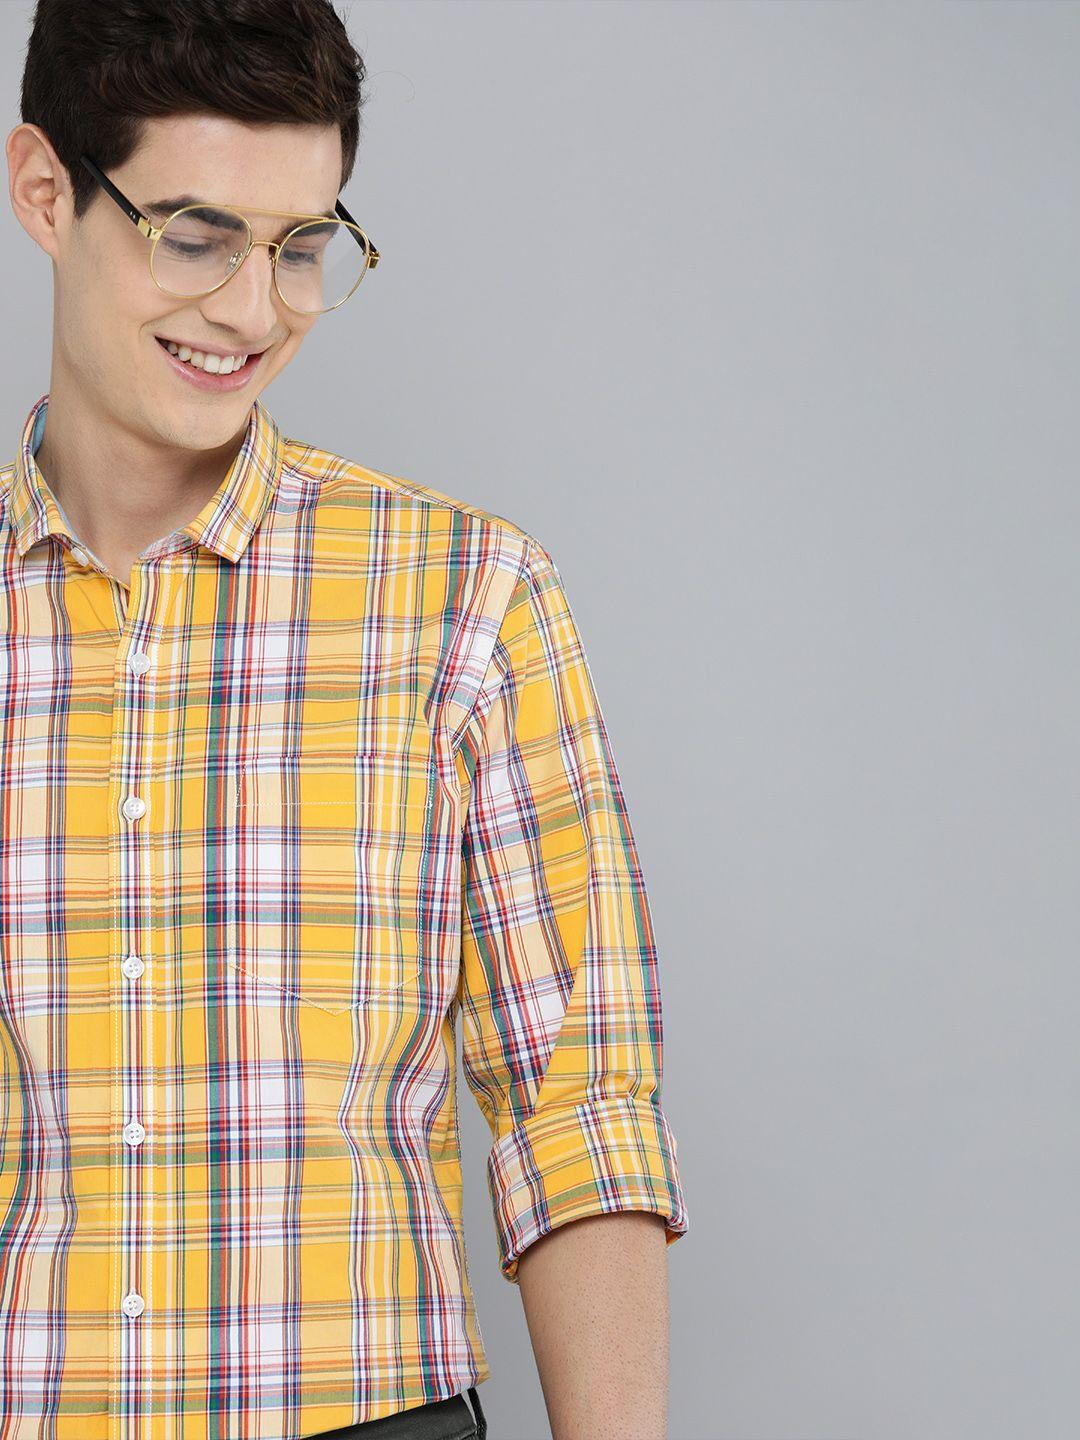 Mast & Harbour Men Yellow & White Regular Fit Checked Casual Sustainable Shirt